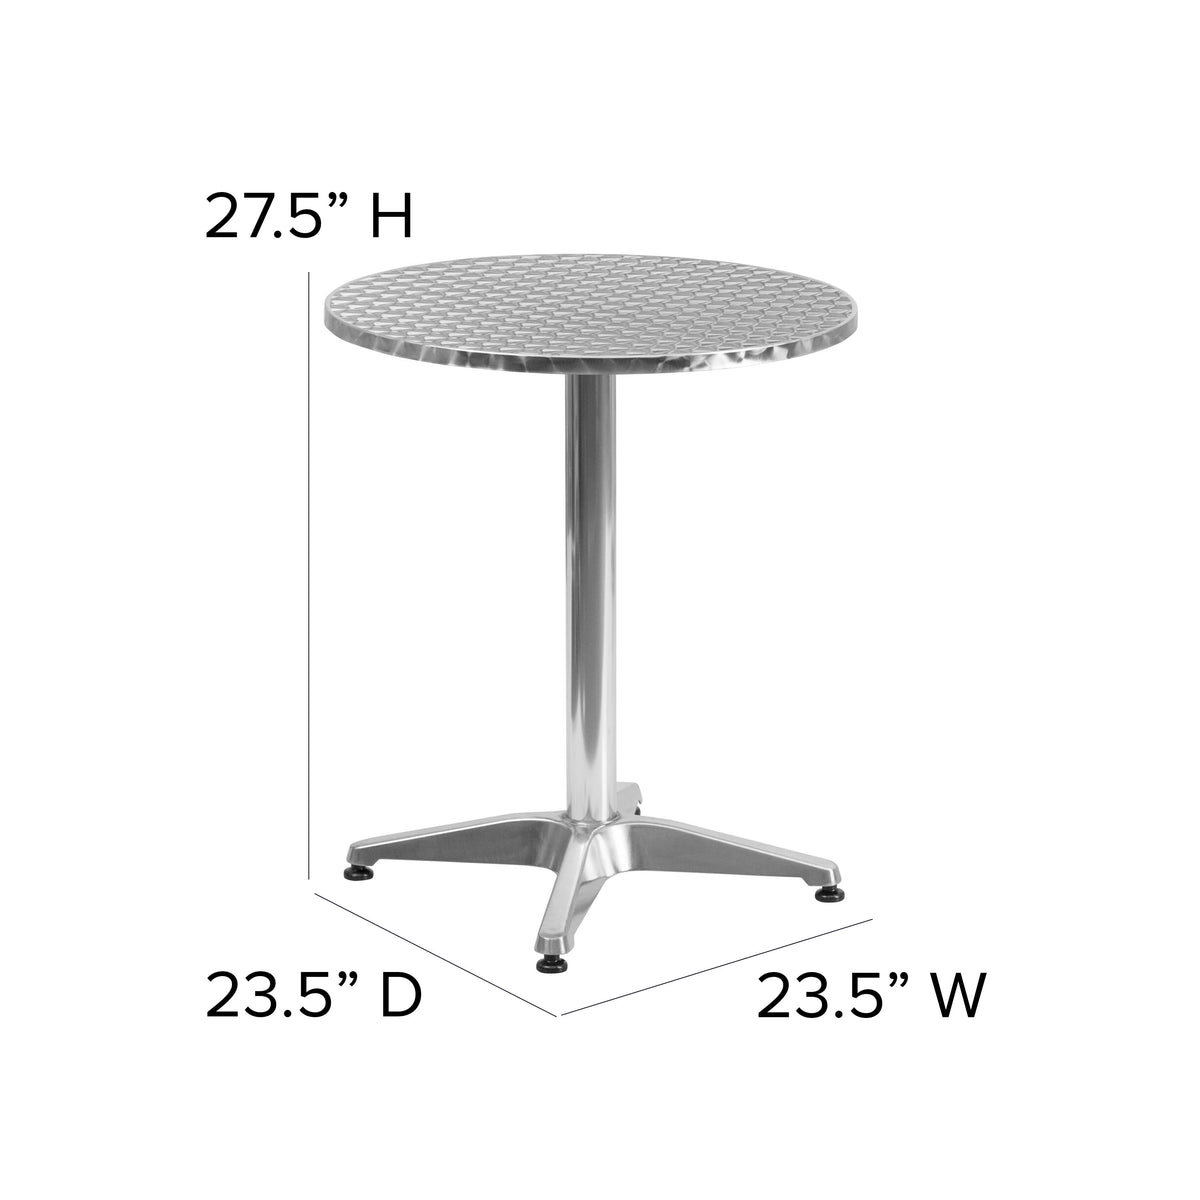 Aluminum |#| 23.5inch Round Aluminum Smooth Top Indoor-Outdoor Table with Base